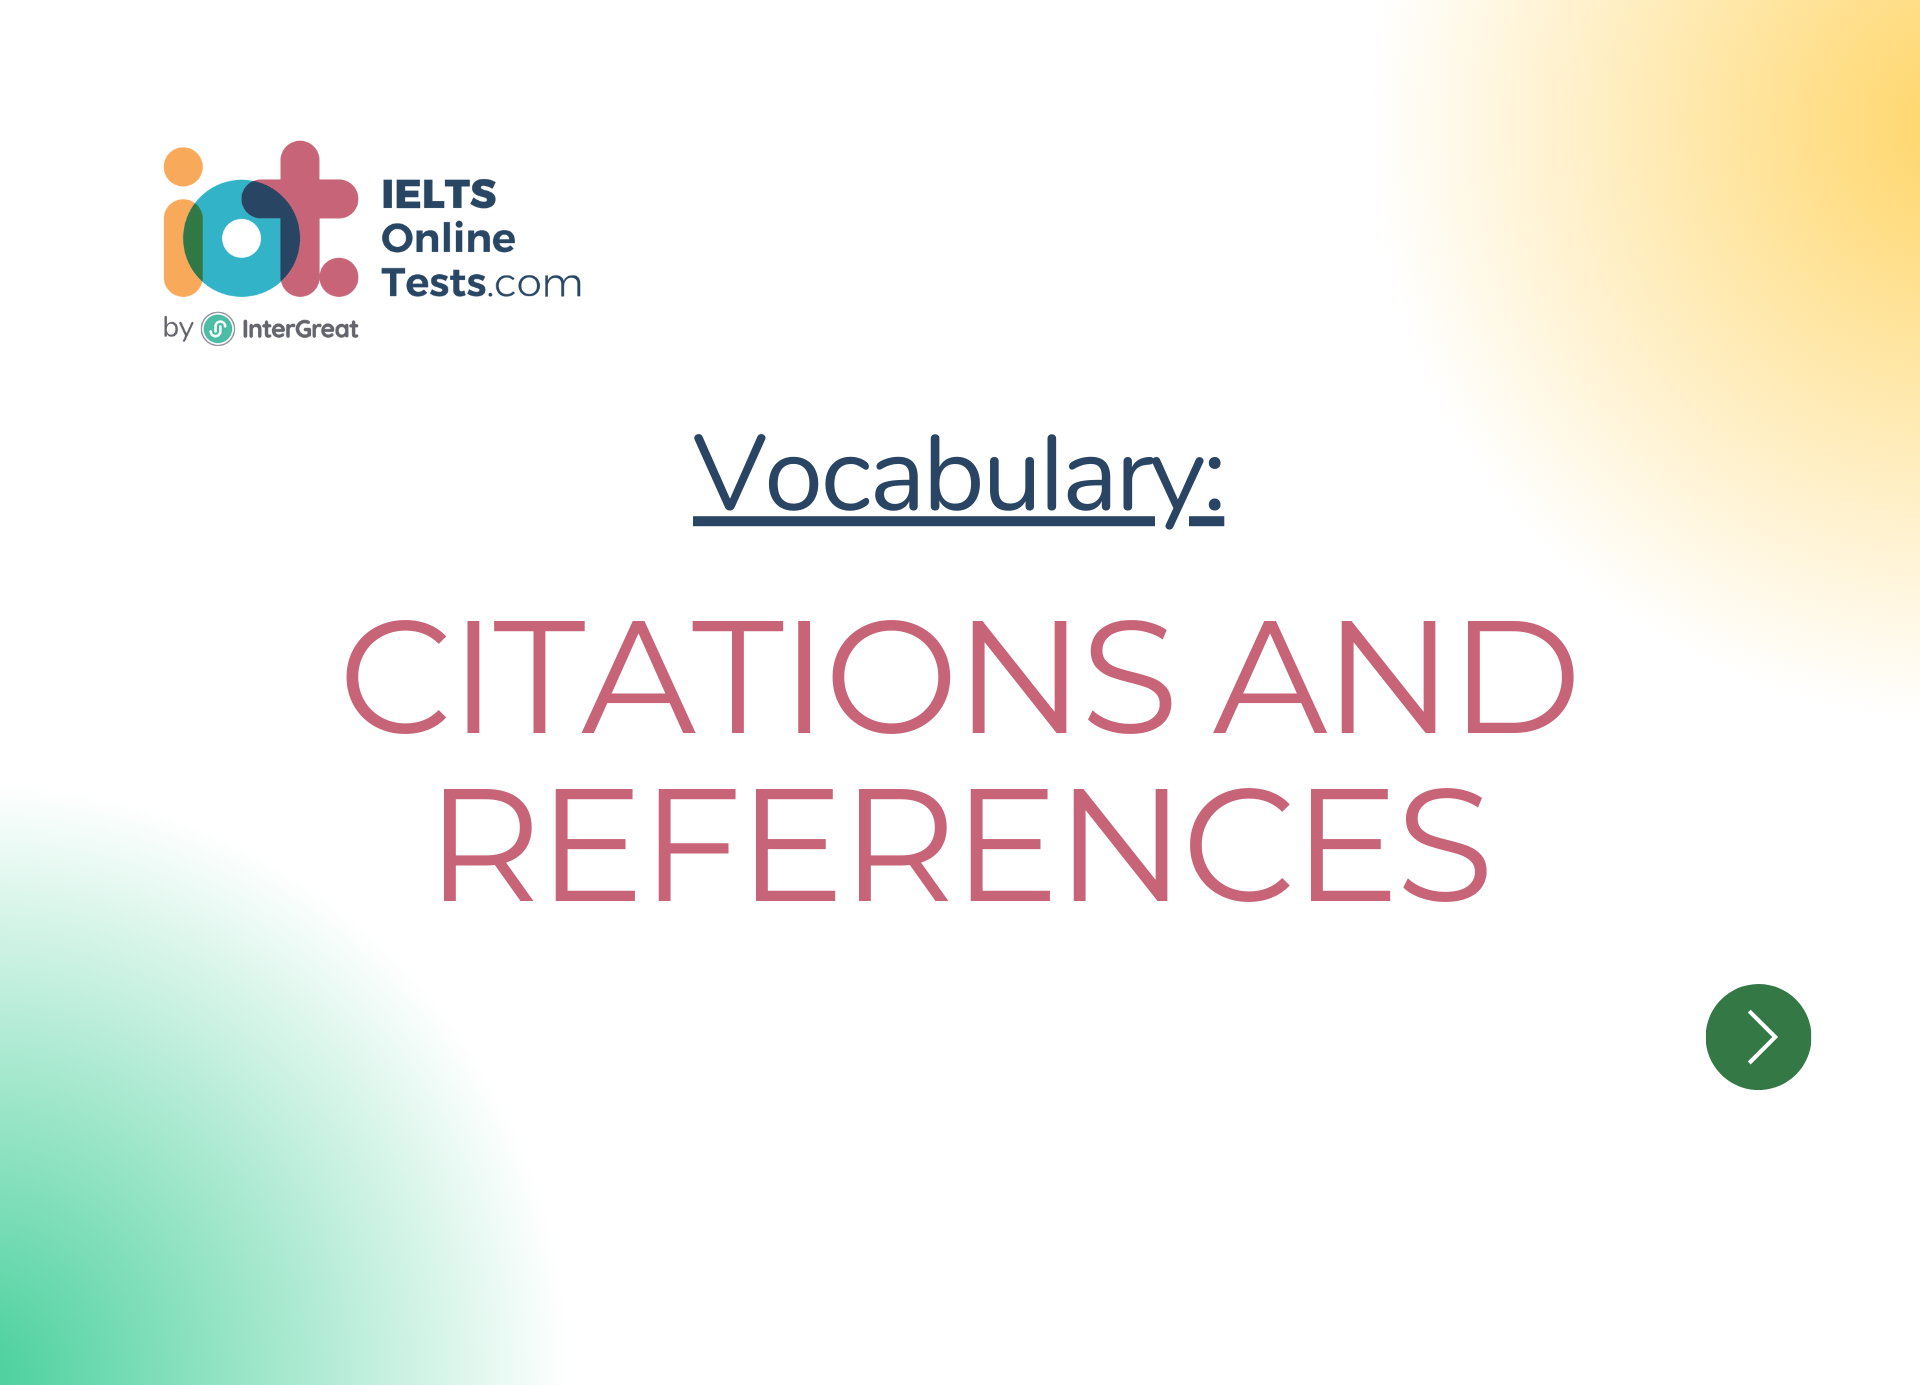 Citations and references